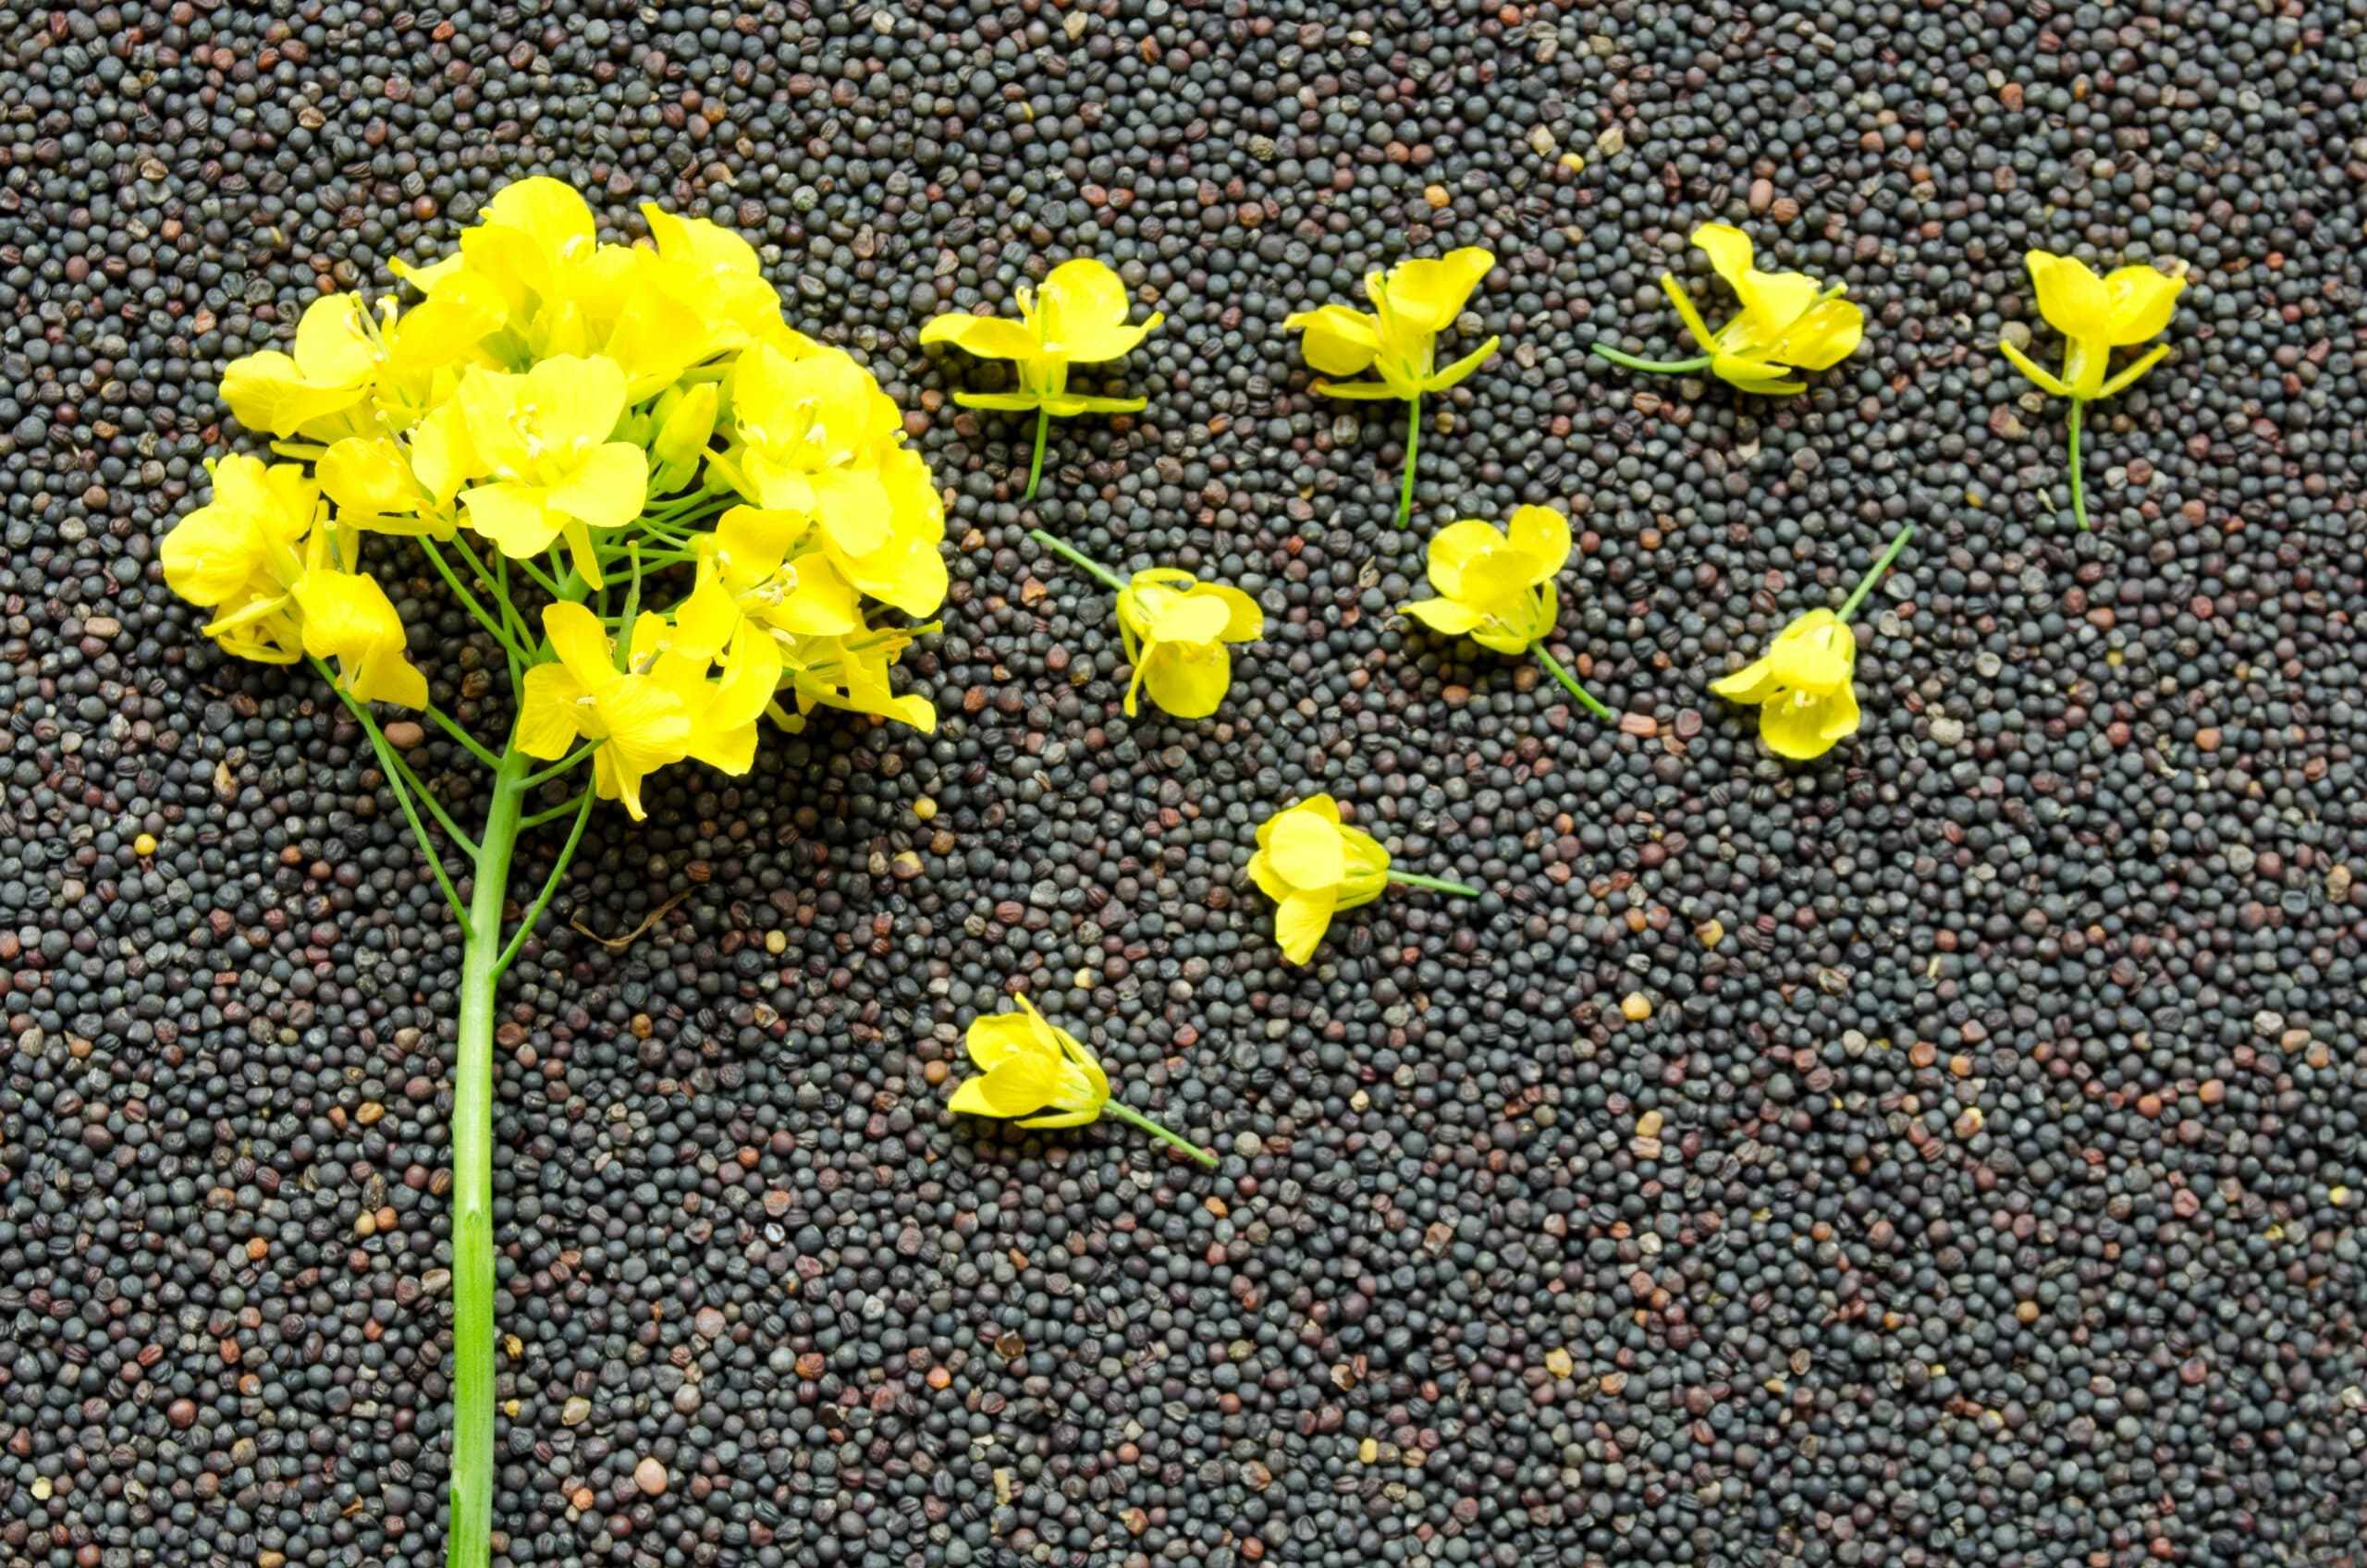 Top view of rapeseed blossom on the background of seeds close-up.